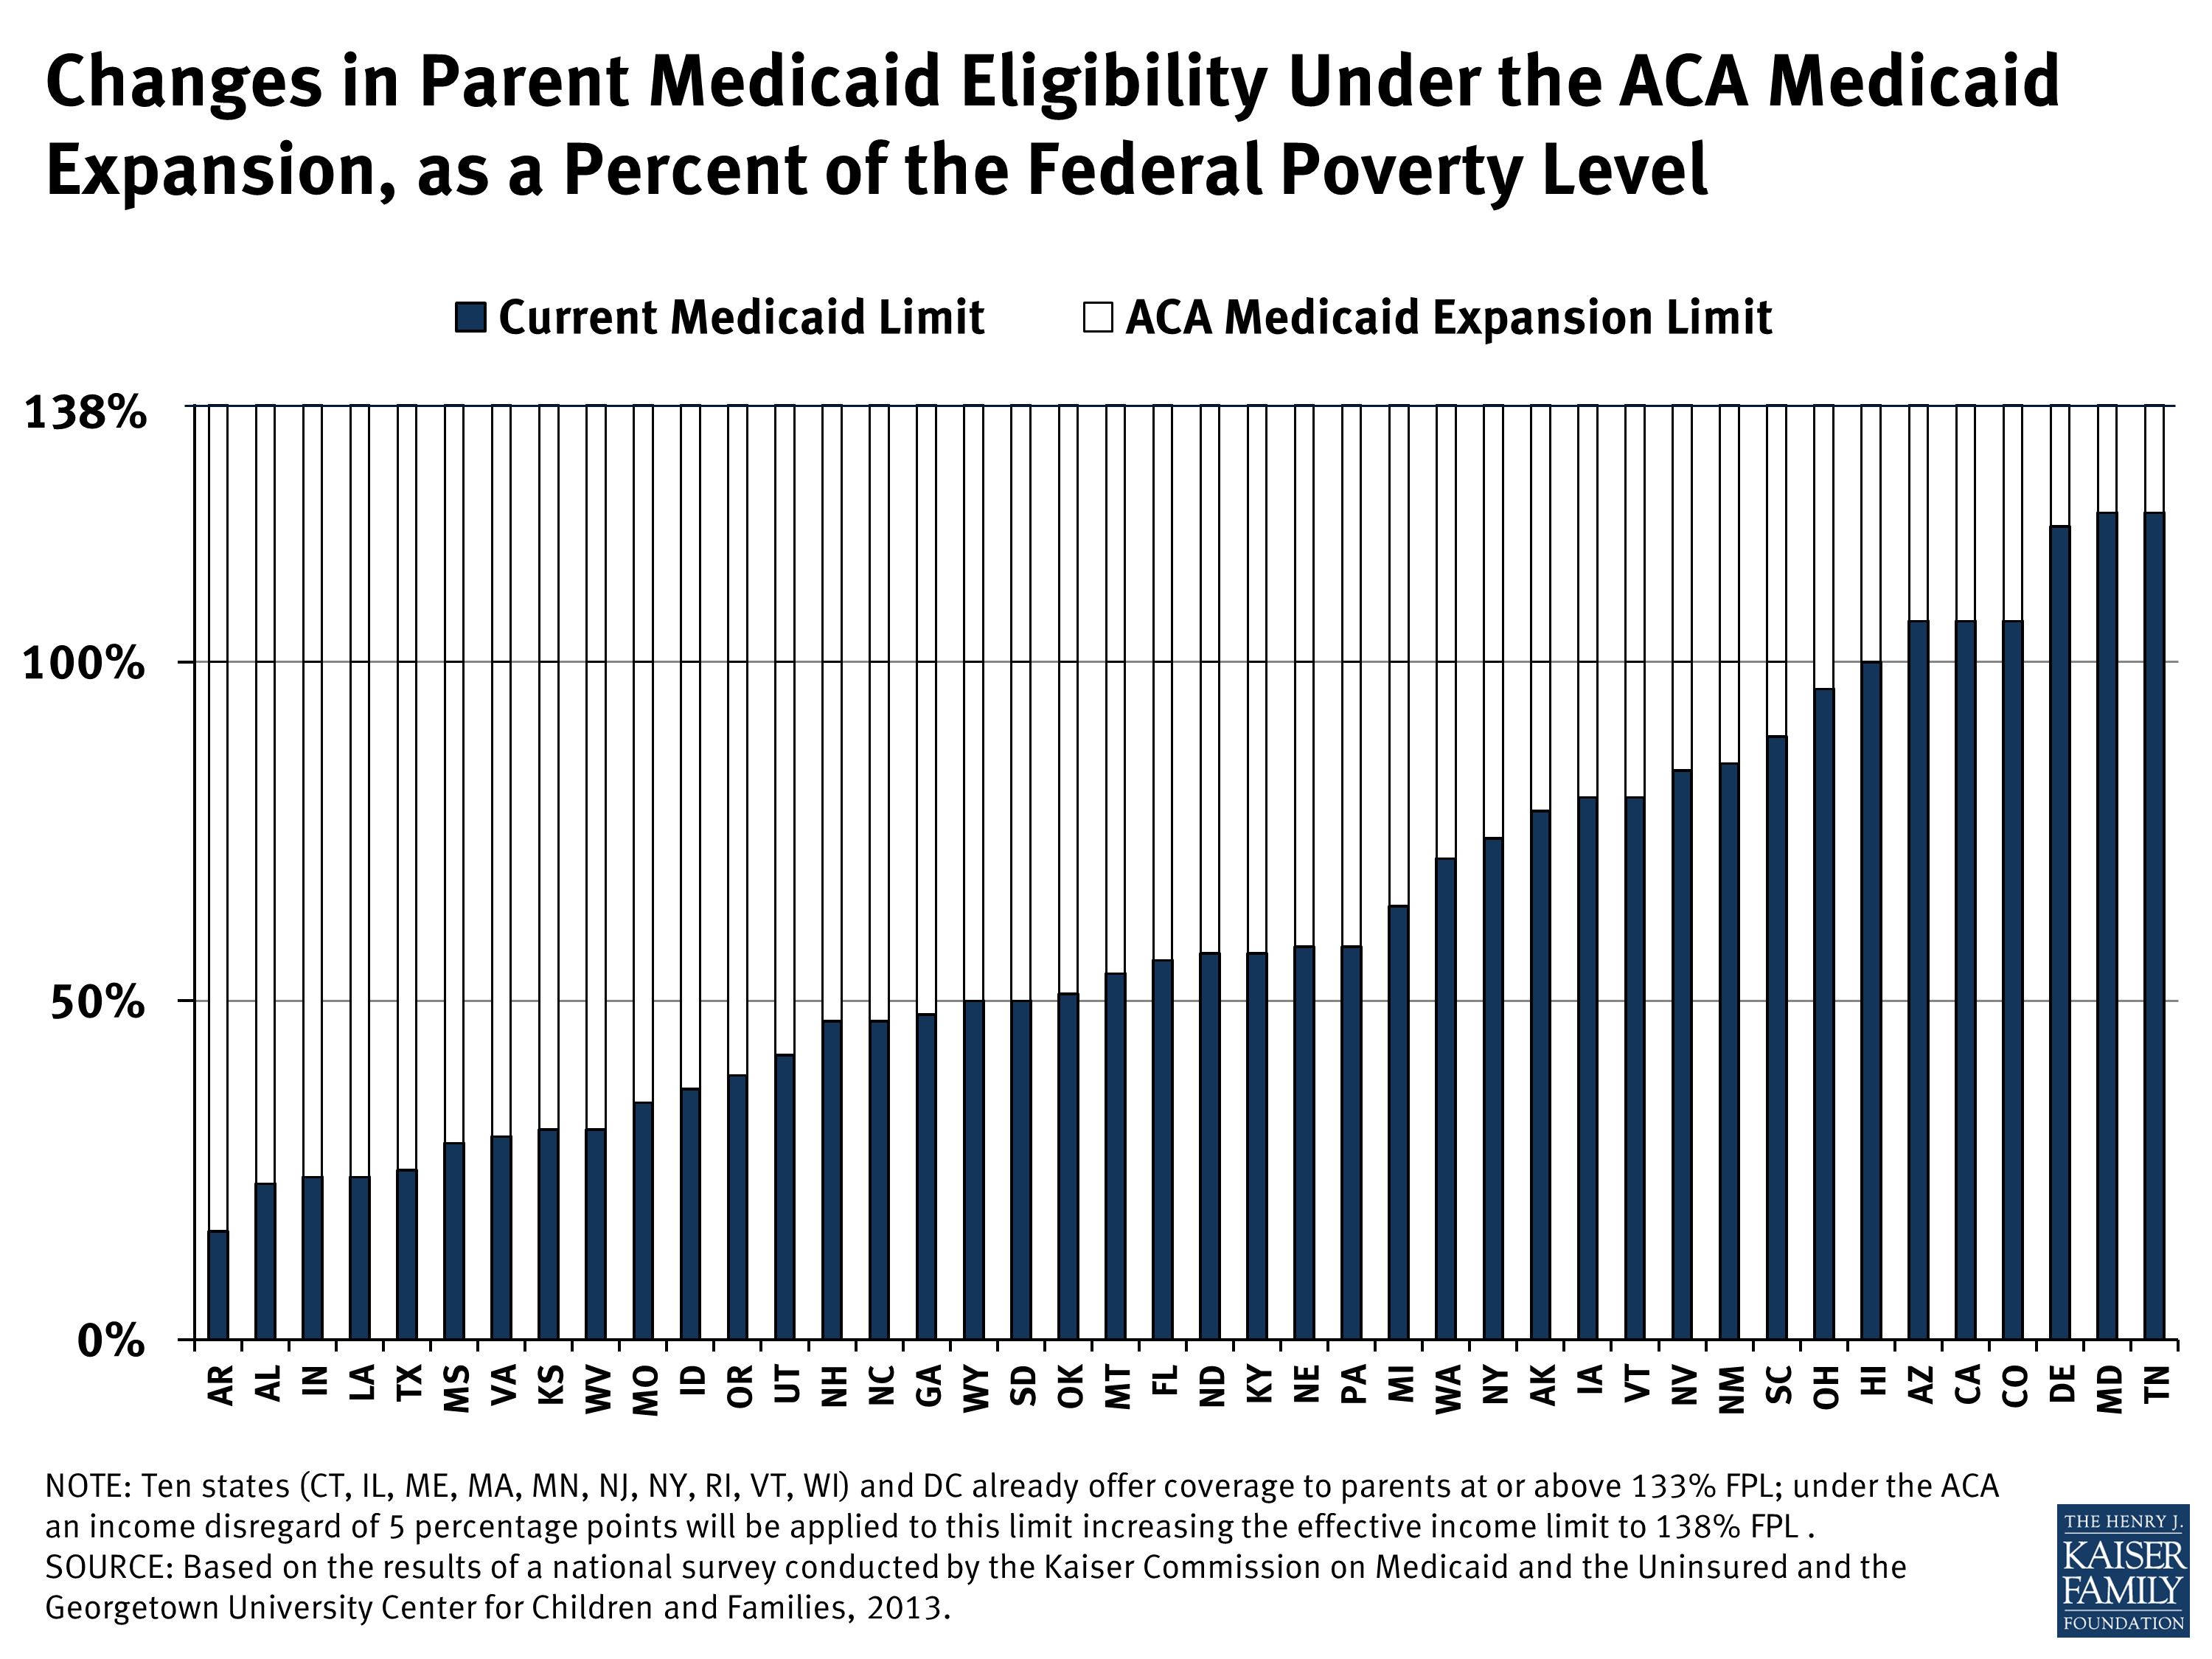 Changes in Parent Medicaid Eligibility Under the ACA Medicaid Expansion